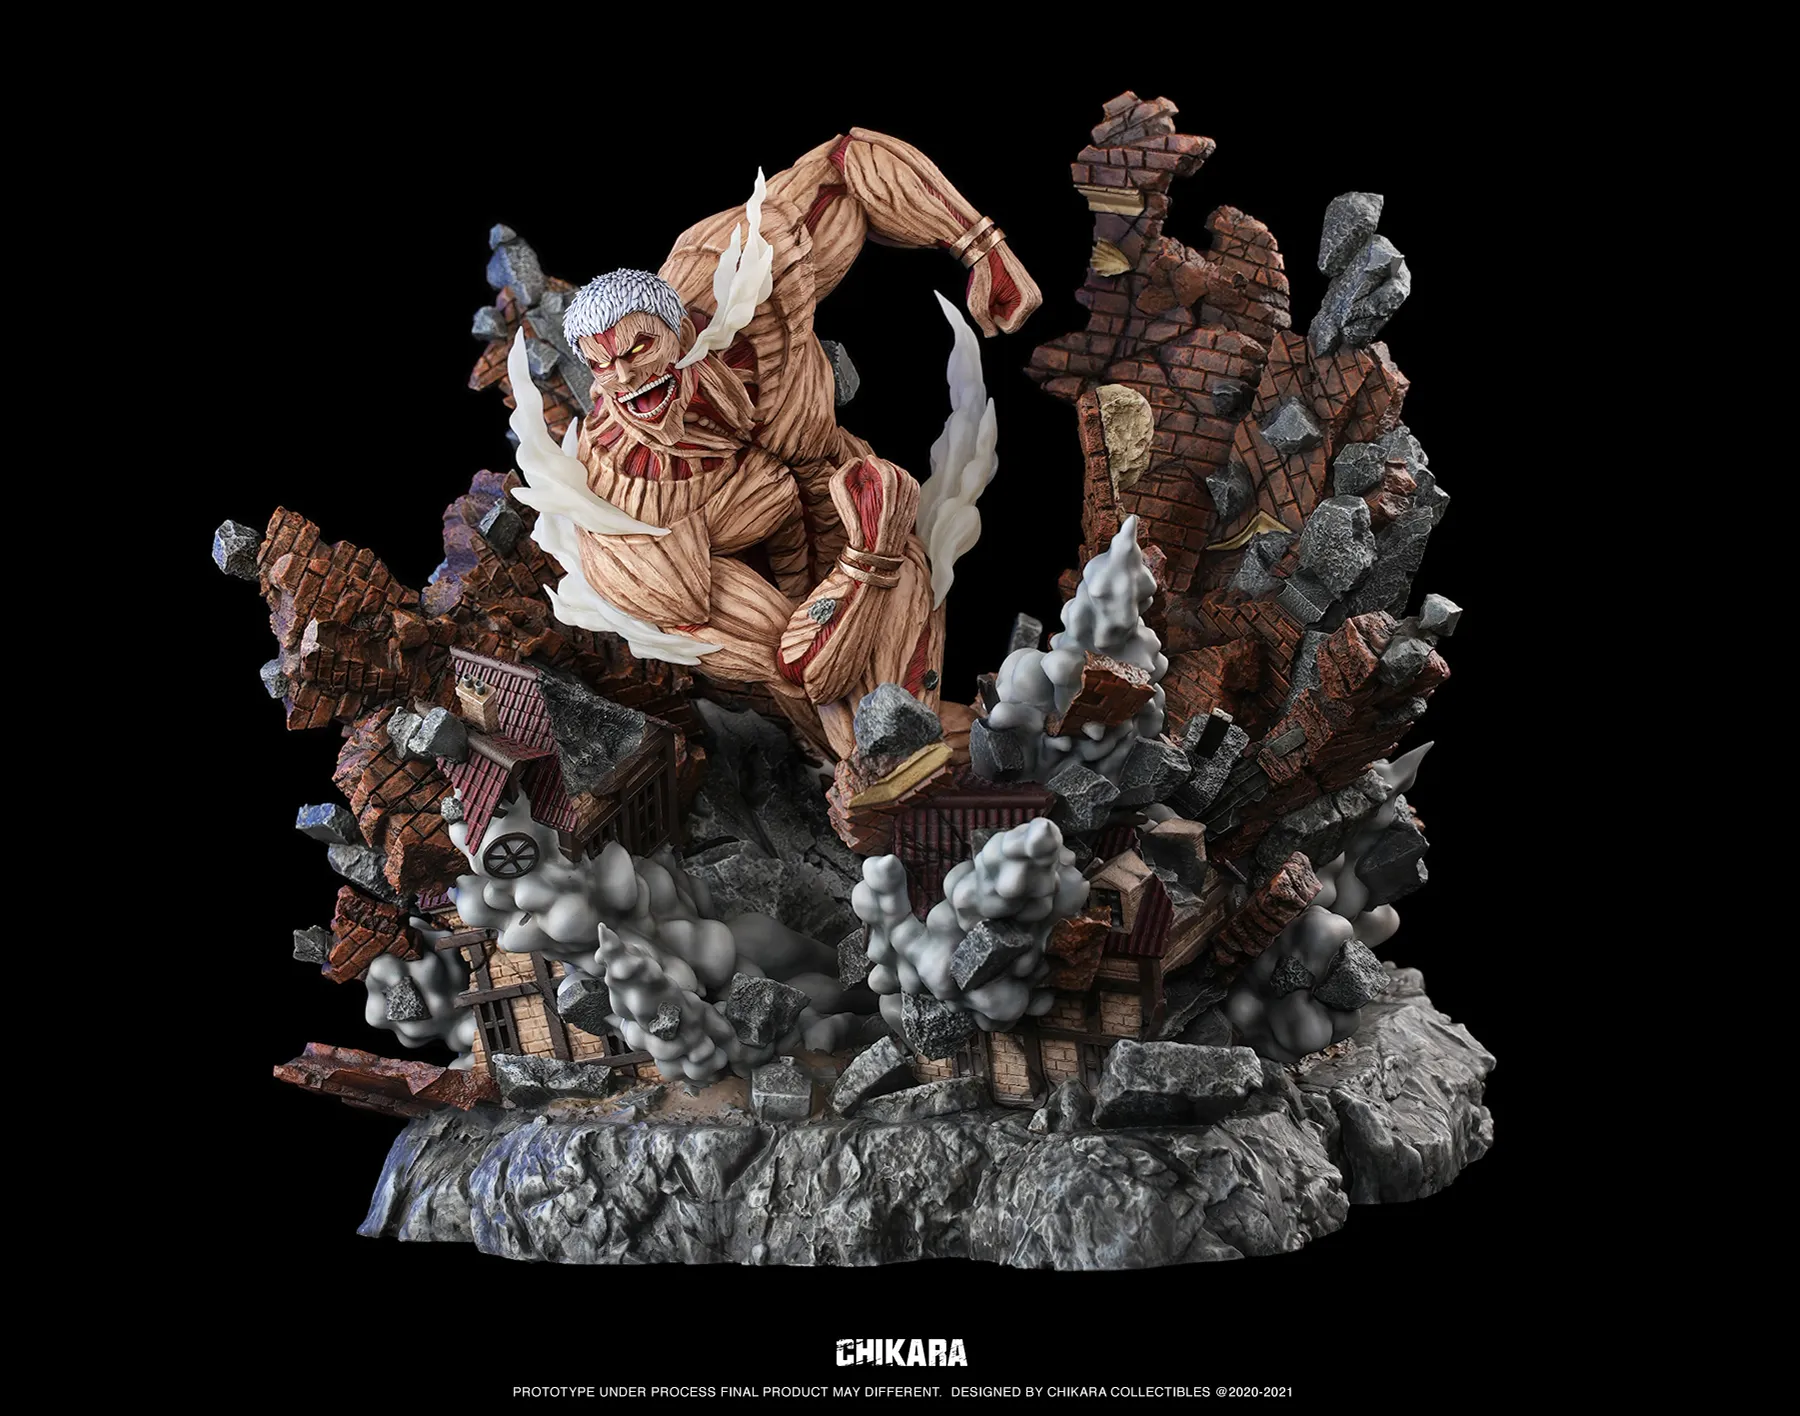 Colossal Titan with LED - Attack On Titan Resin Statue - Giant